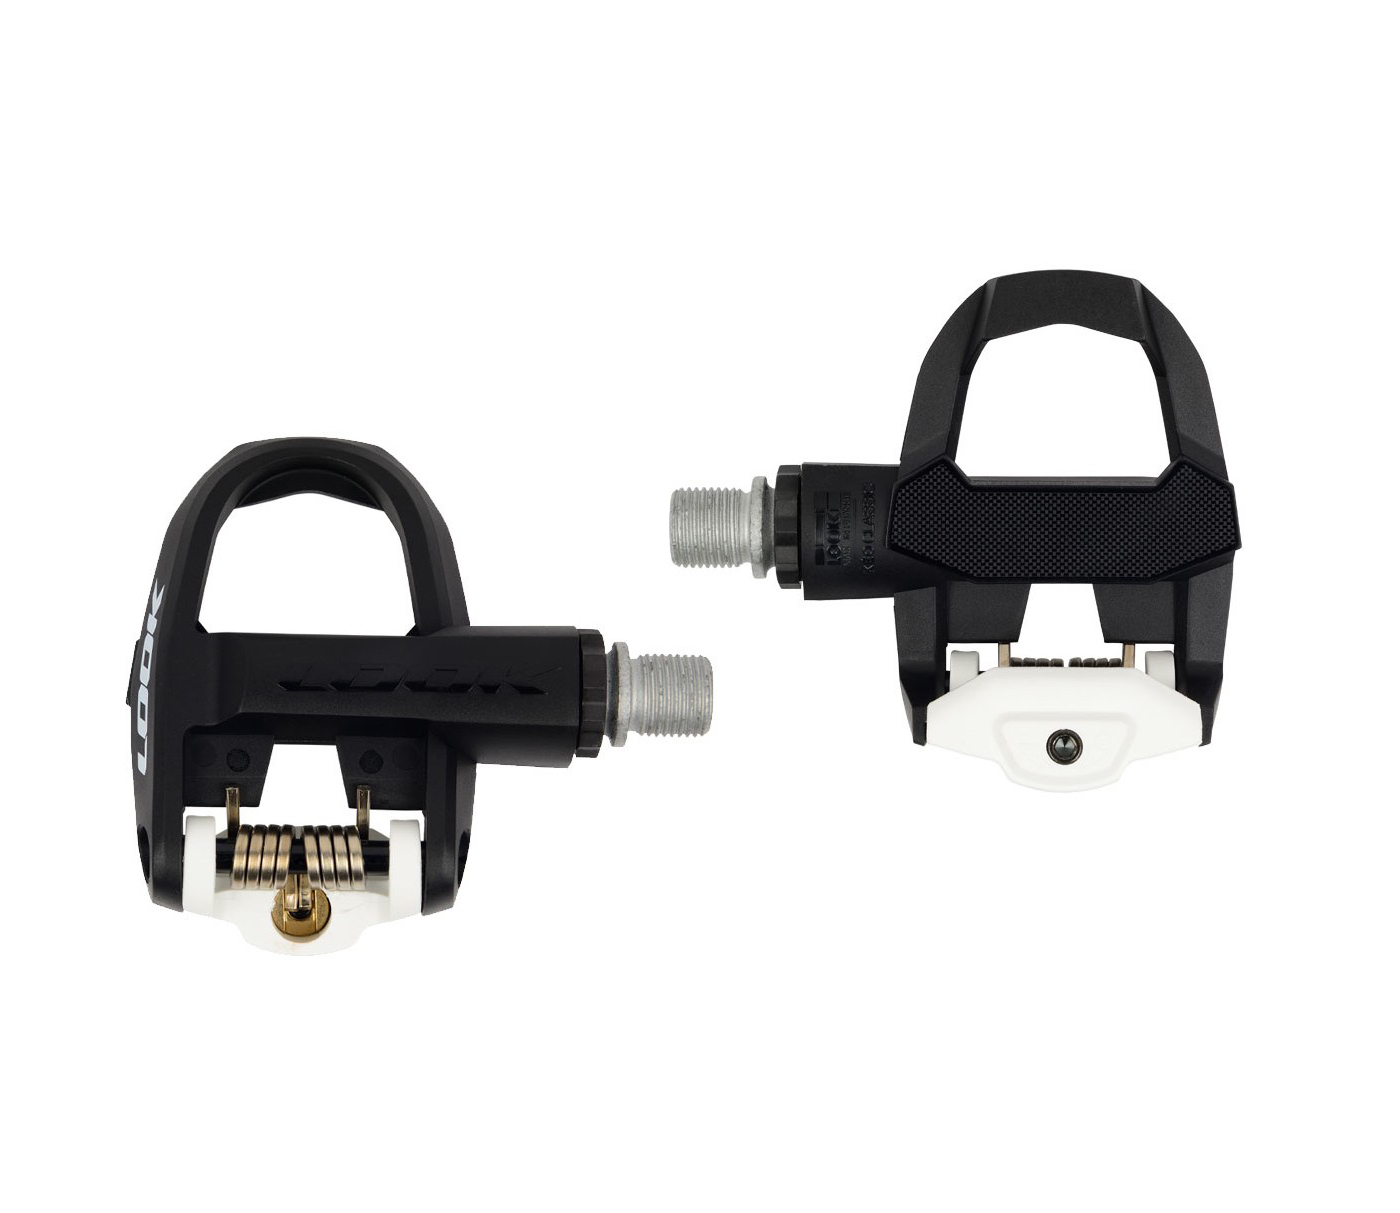 keo clipless pedals